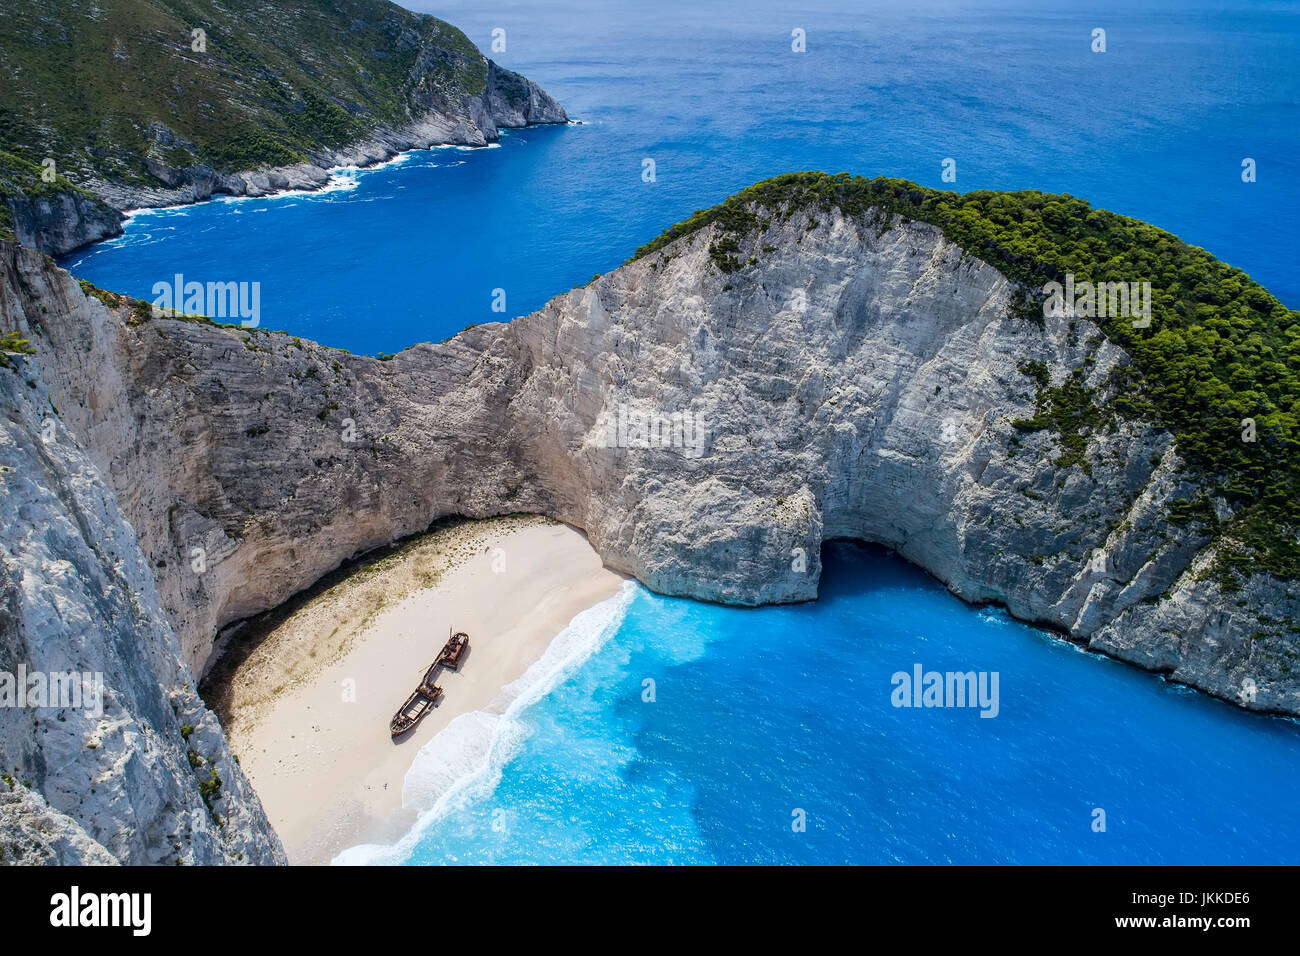 Aerial view of Navagio (Shipwreck) Beach in Zakynthos island, Greece. Navagio Beach is a popular attraction among tourists visiting the island of Zaky Stock Photo